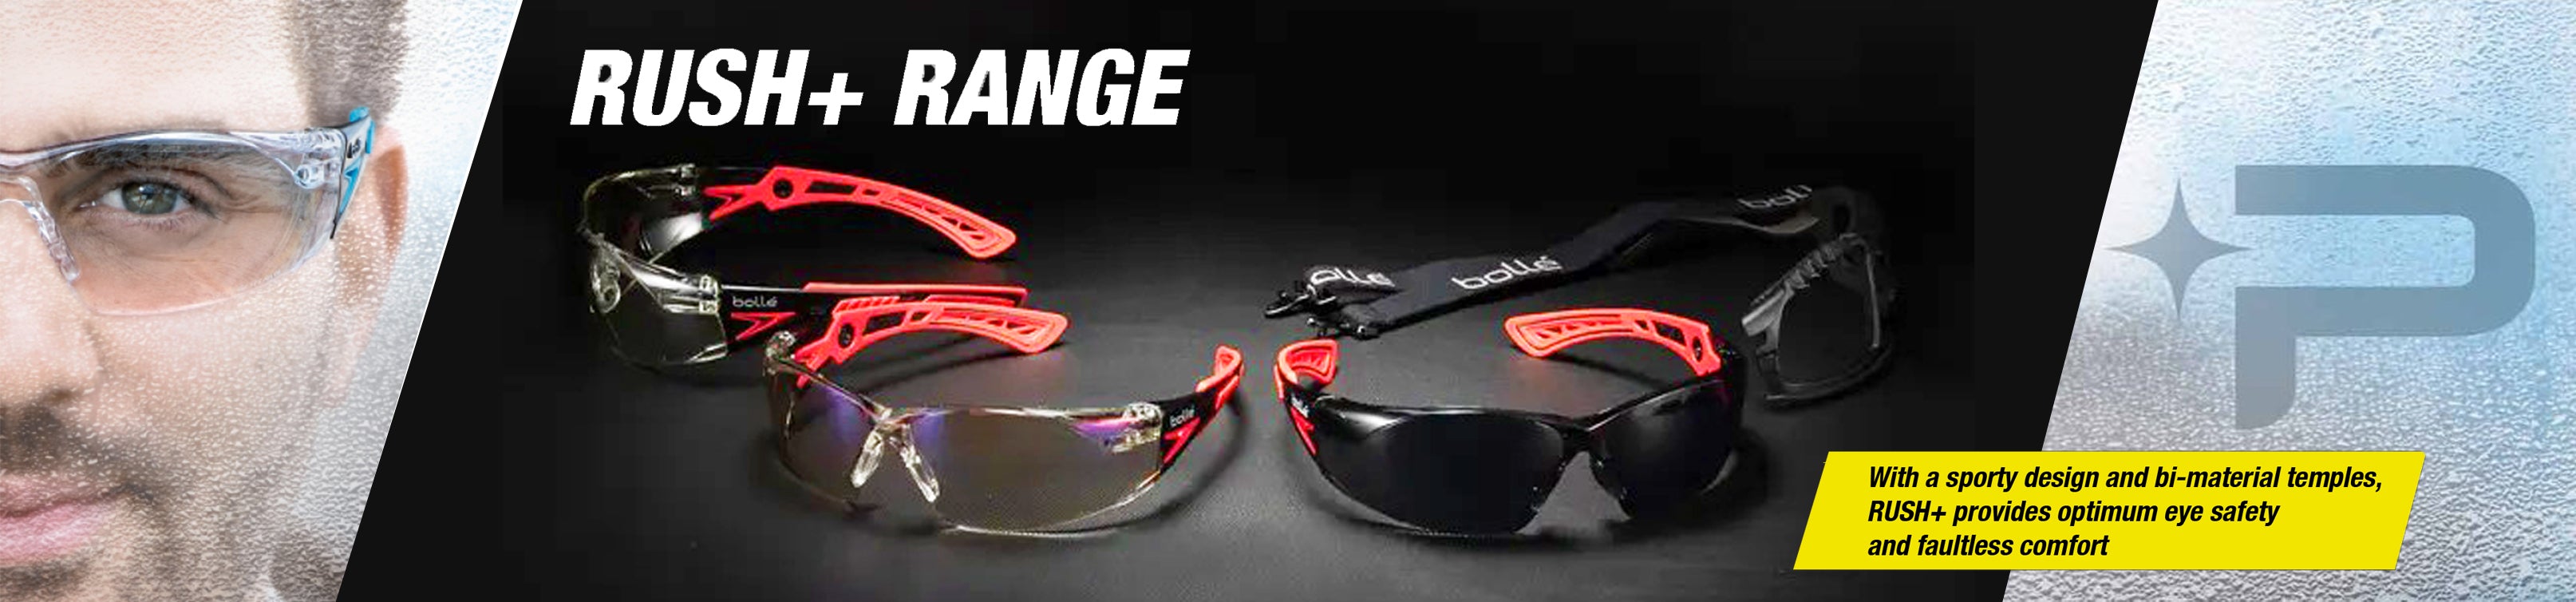 Bolle Rush+ Safety Glasses